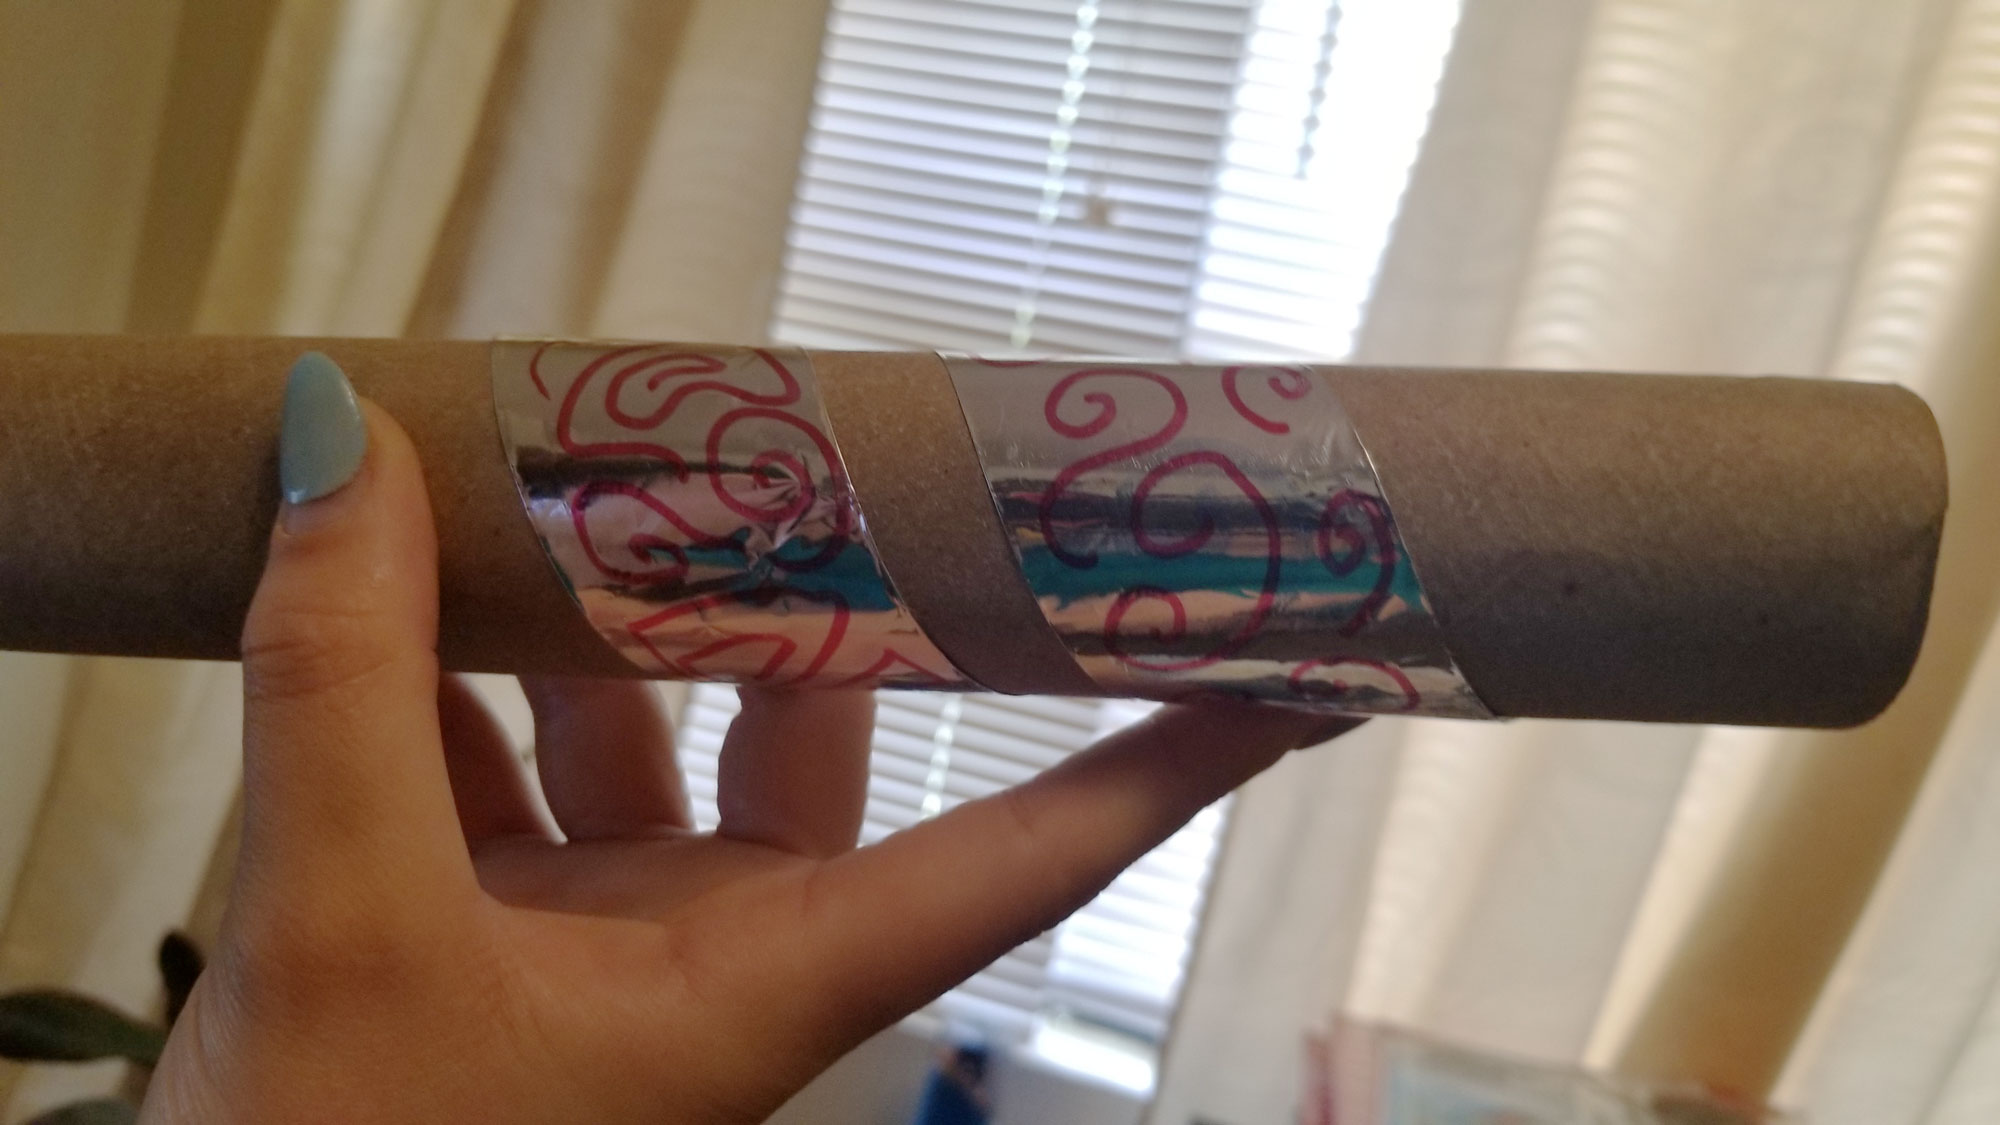 Decorated aluminum foil wrapped around an empty paper towel roll.